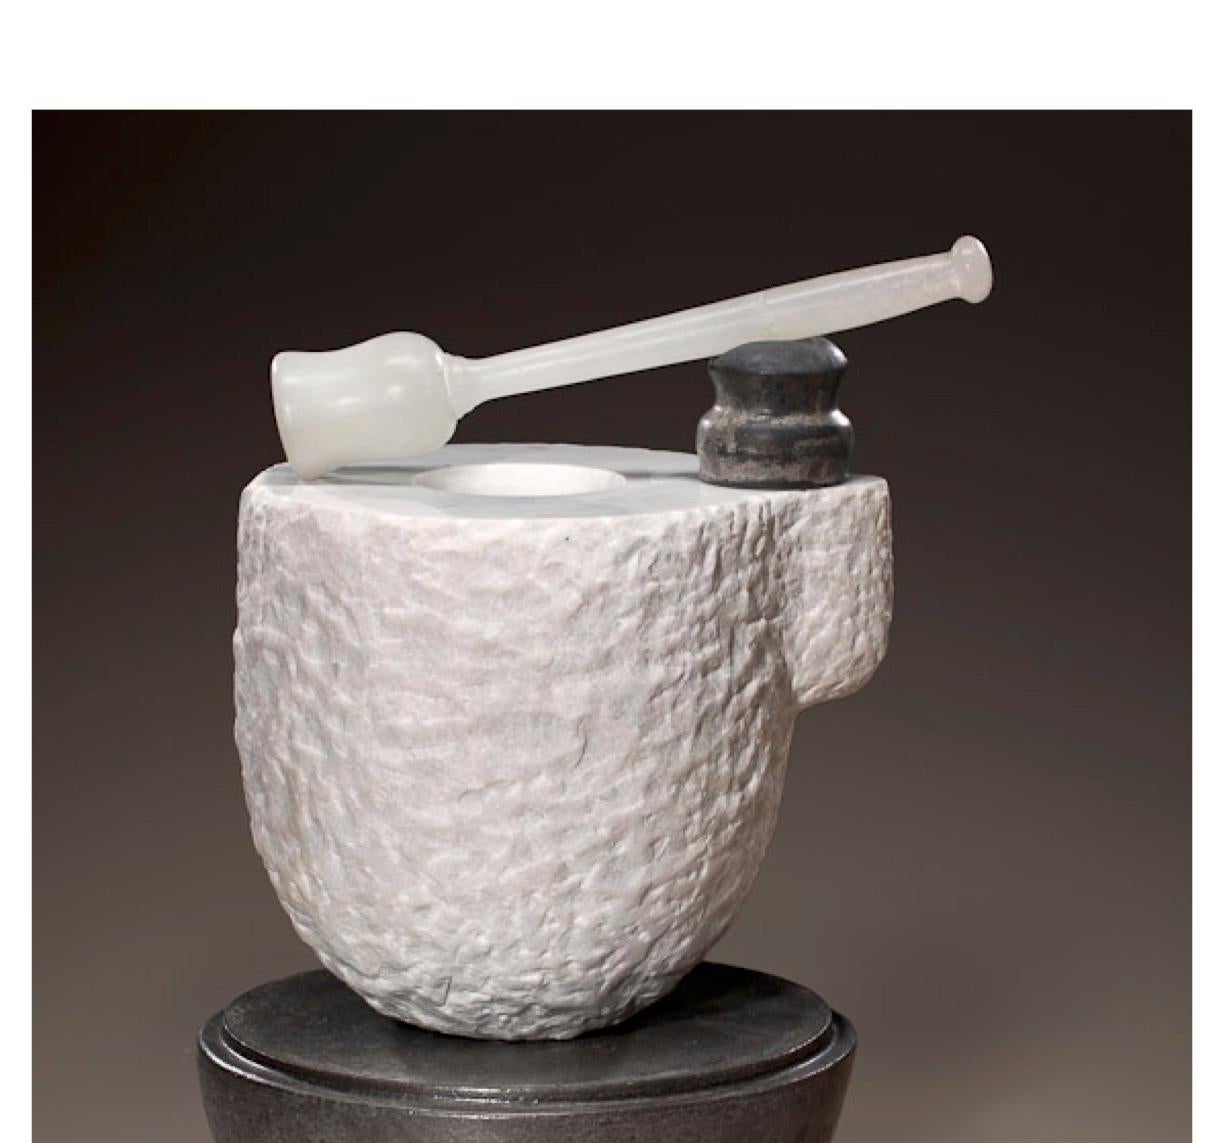 American Richard Hirsch White Marble Mortar and Glass Pestle Sculpture, 2006 - 2010 For Sale